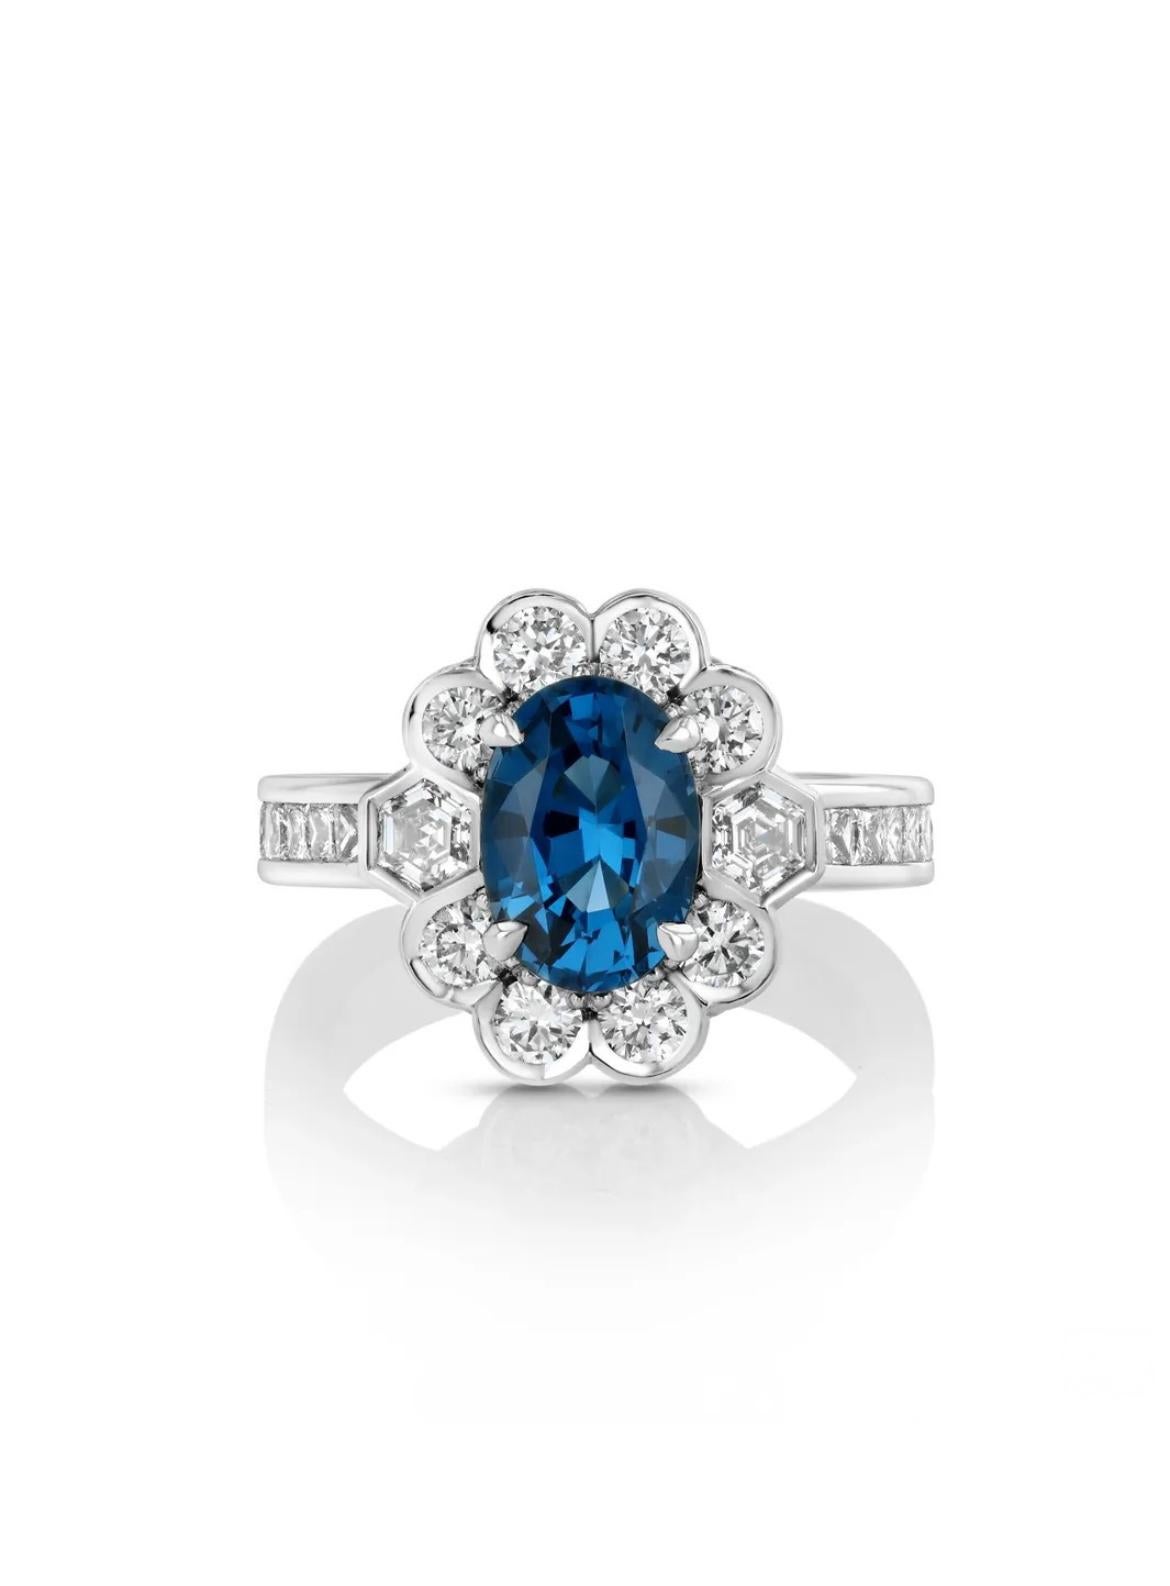 Oval Cut Ring in platinum, featuring a 2.09ct cobalt Spinel from Vietnam. AGL certified. For Sale